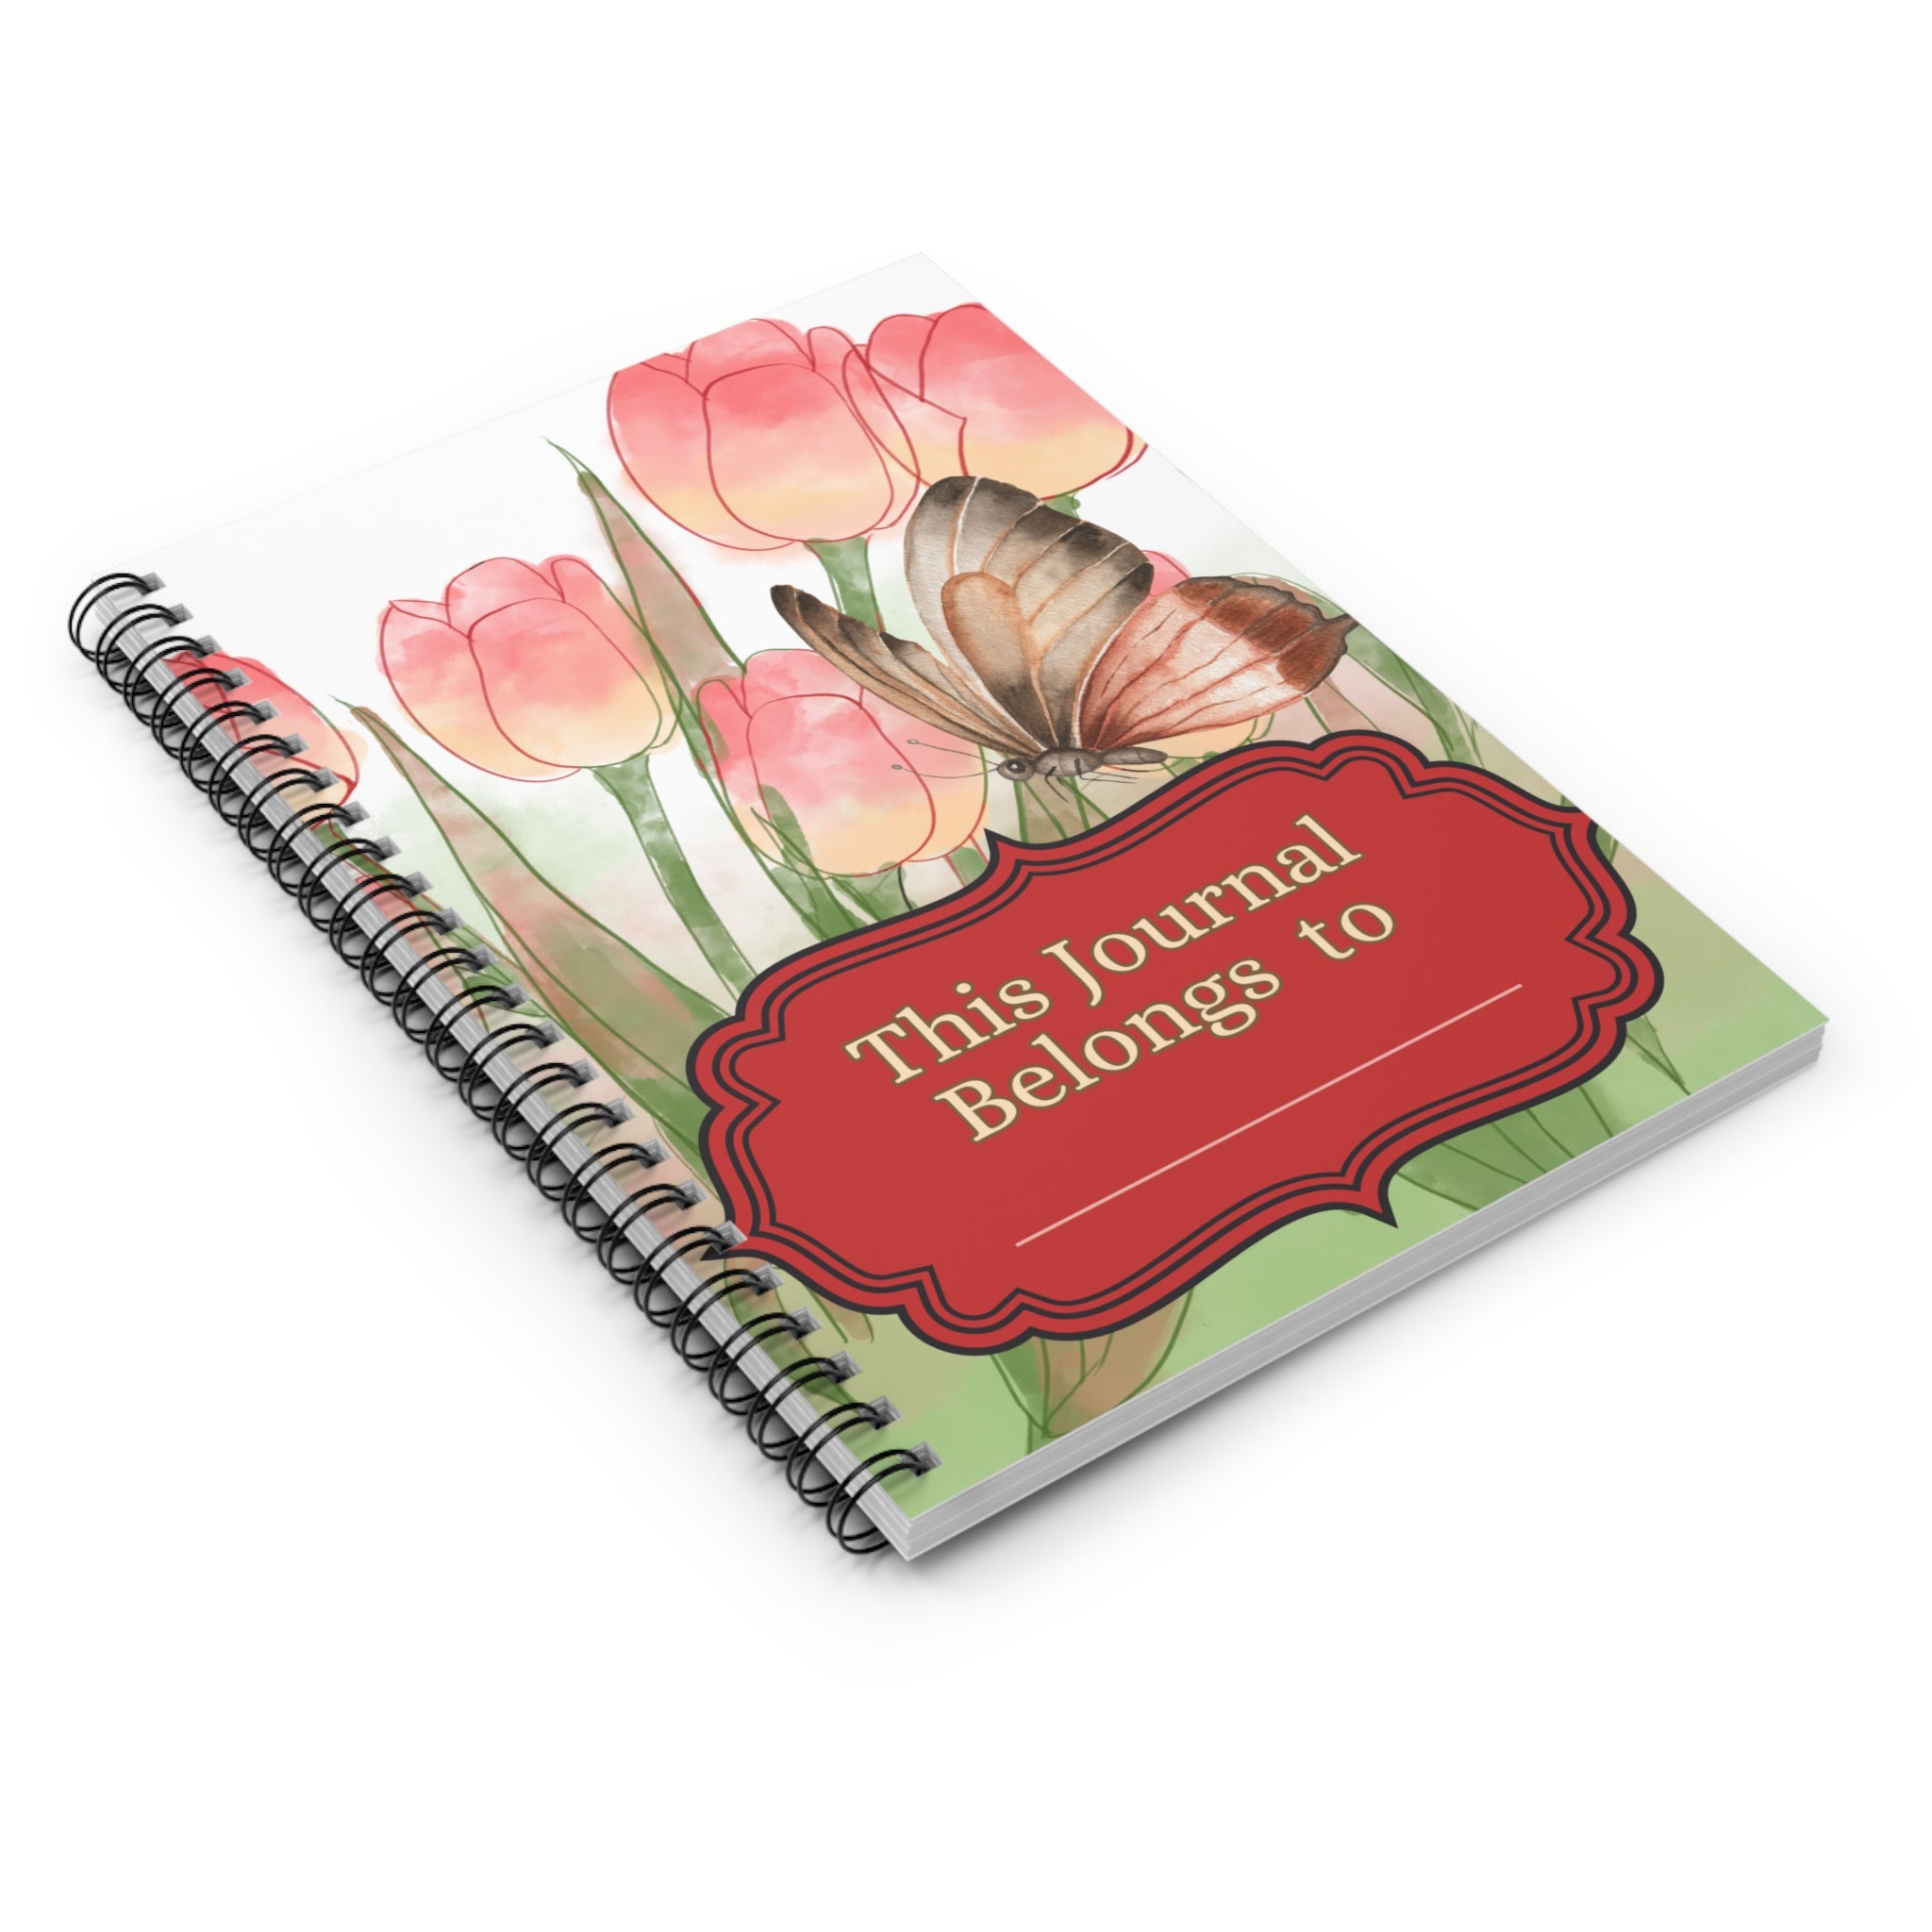 Personal Journal Spiral Notebook - Ruled Line Paper products Krazy Heart Designs Boutique   